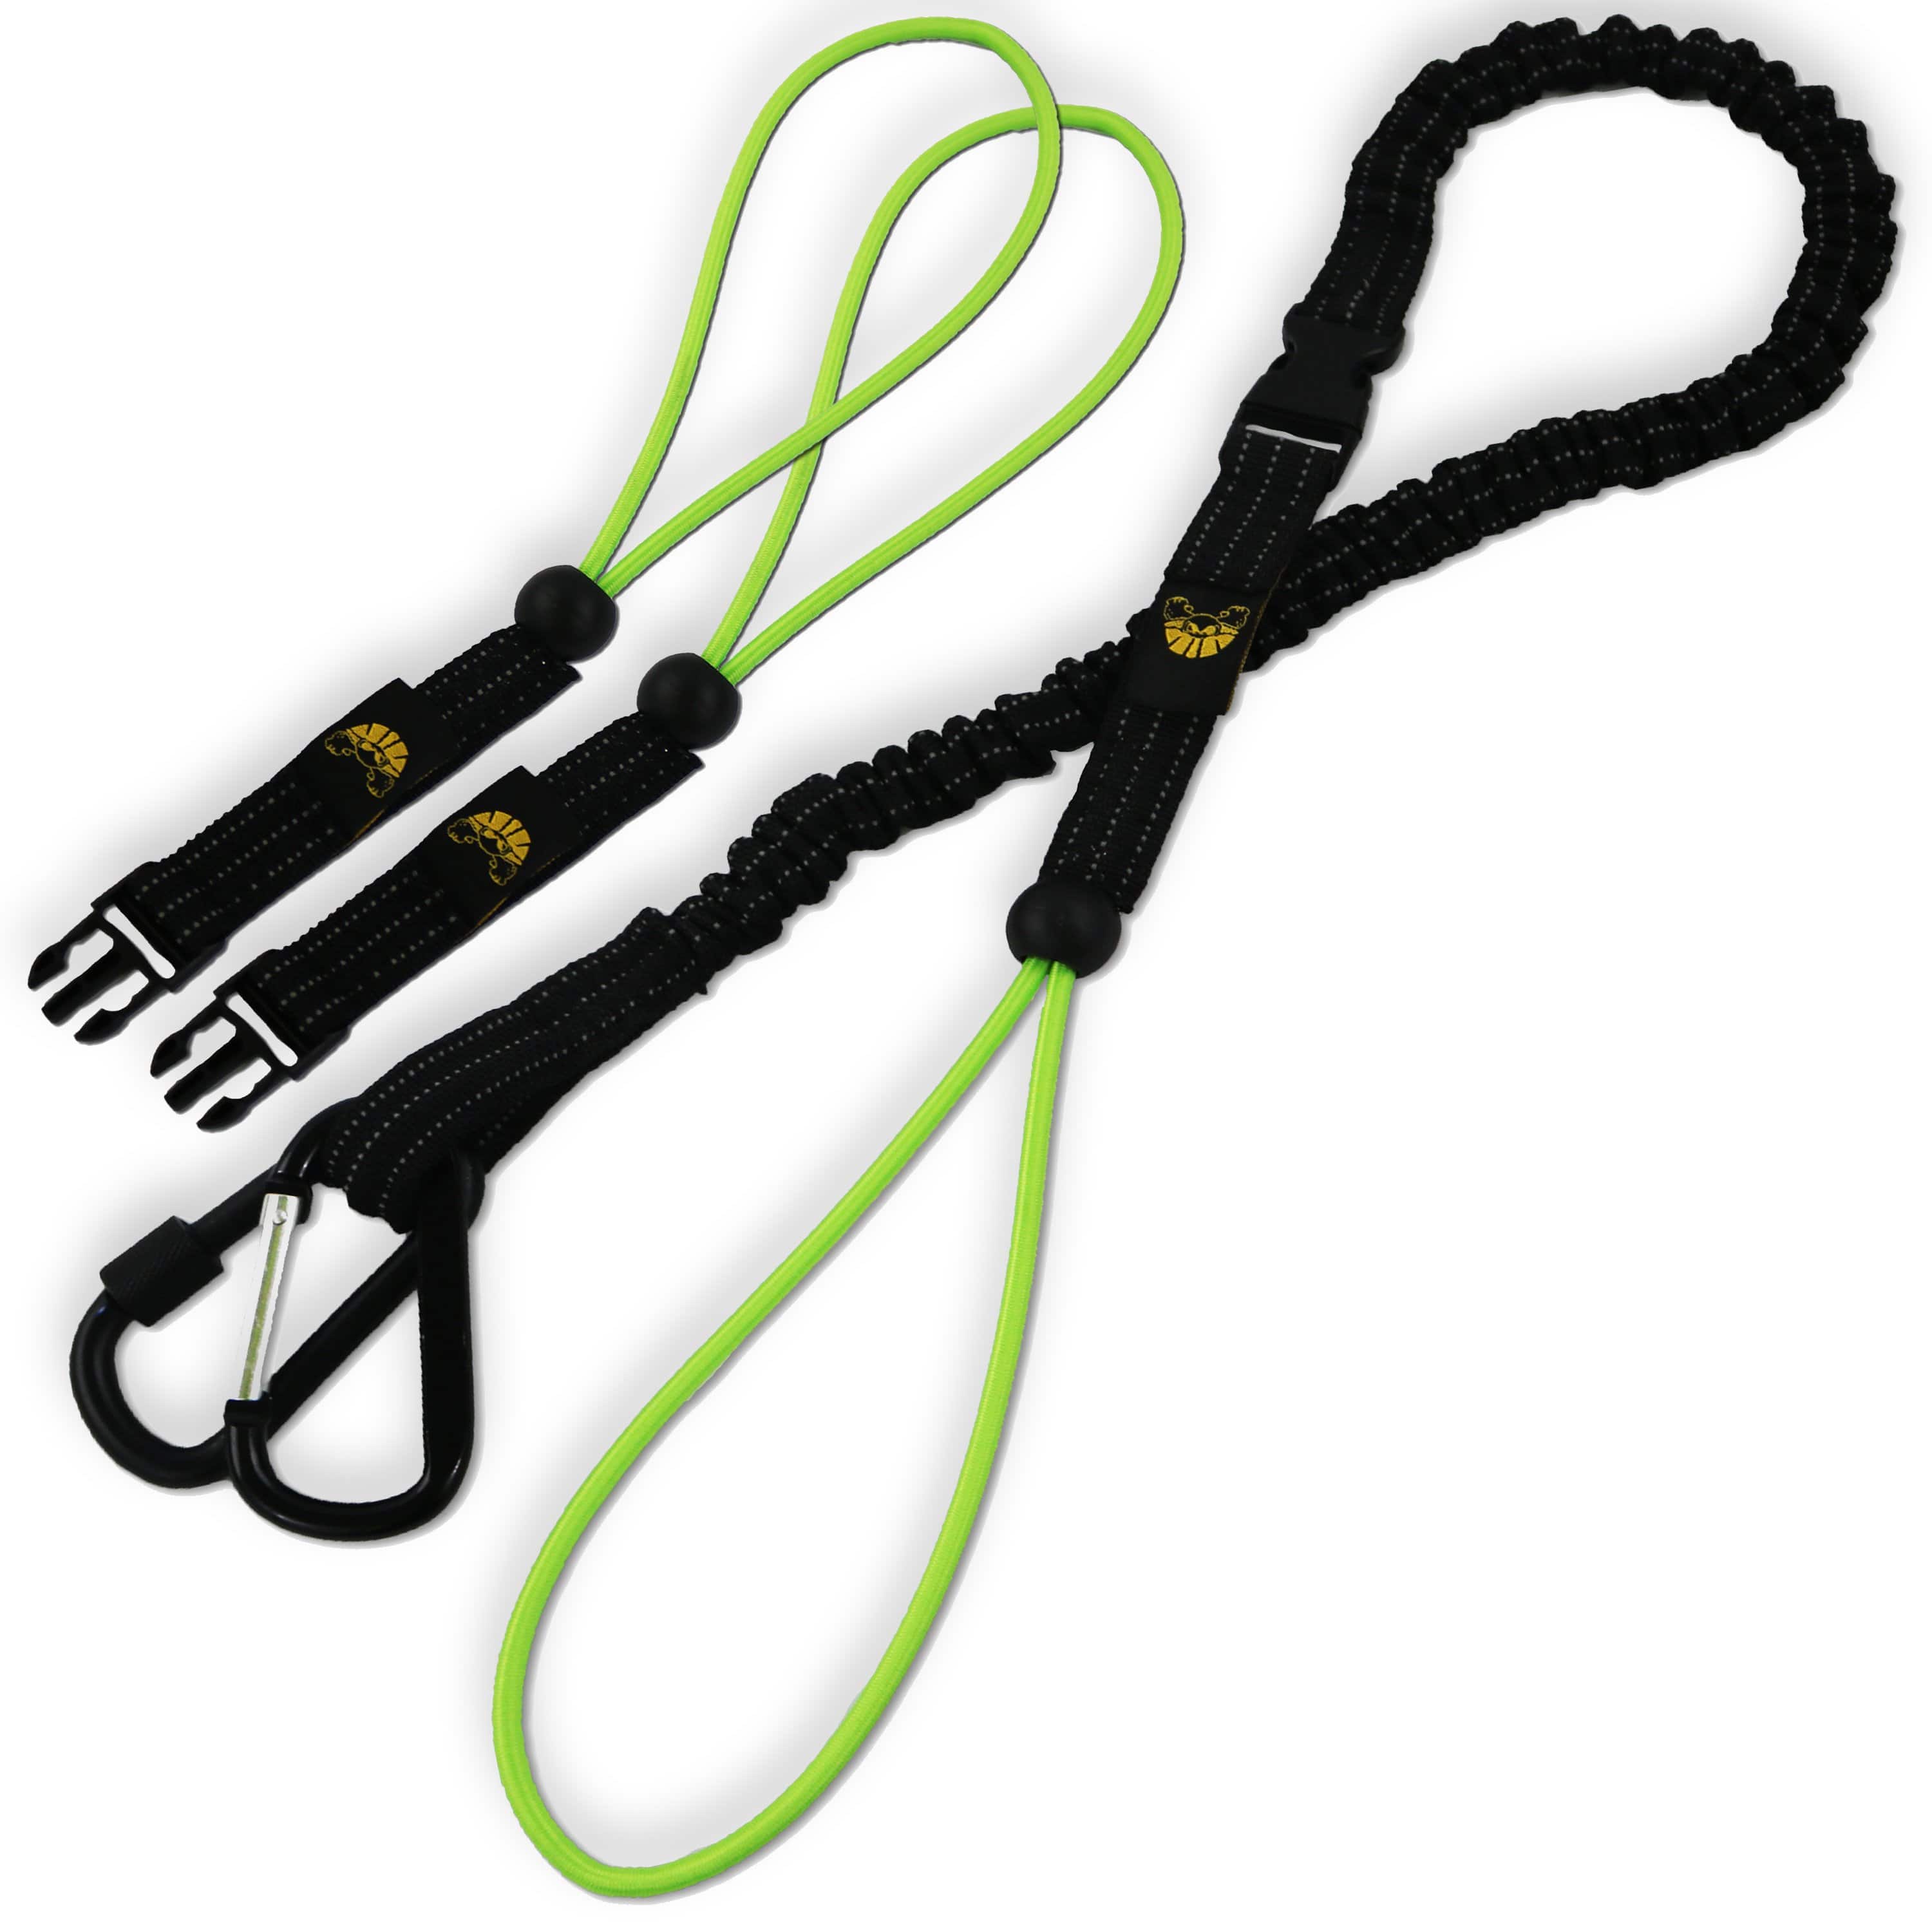 Tool Lanyard with Carabiner Attachment Retractable Elastic Rope